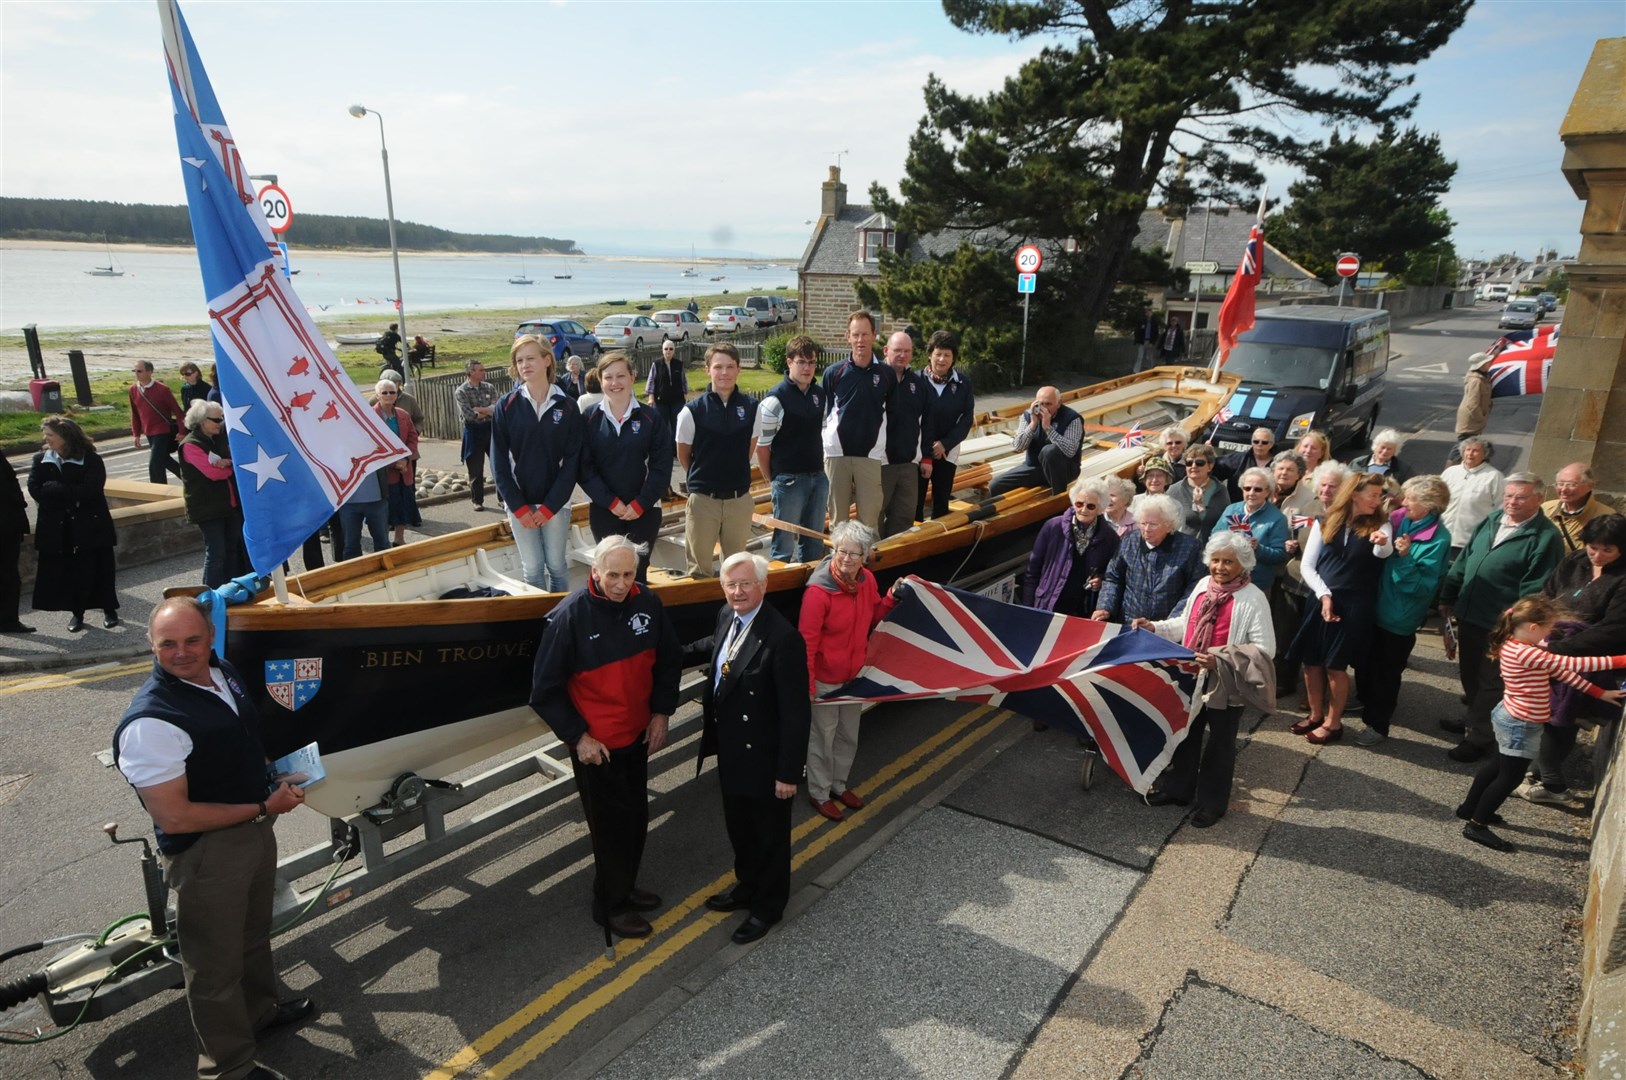 The Moray Gig leaving Findhorn to attend the Queen's 2012 Diamond Jubilee.